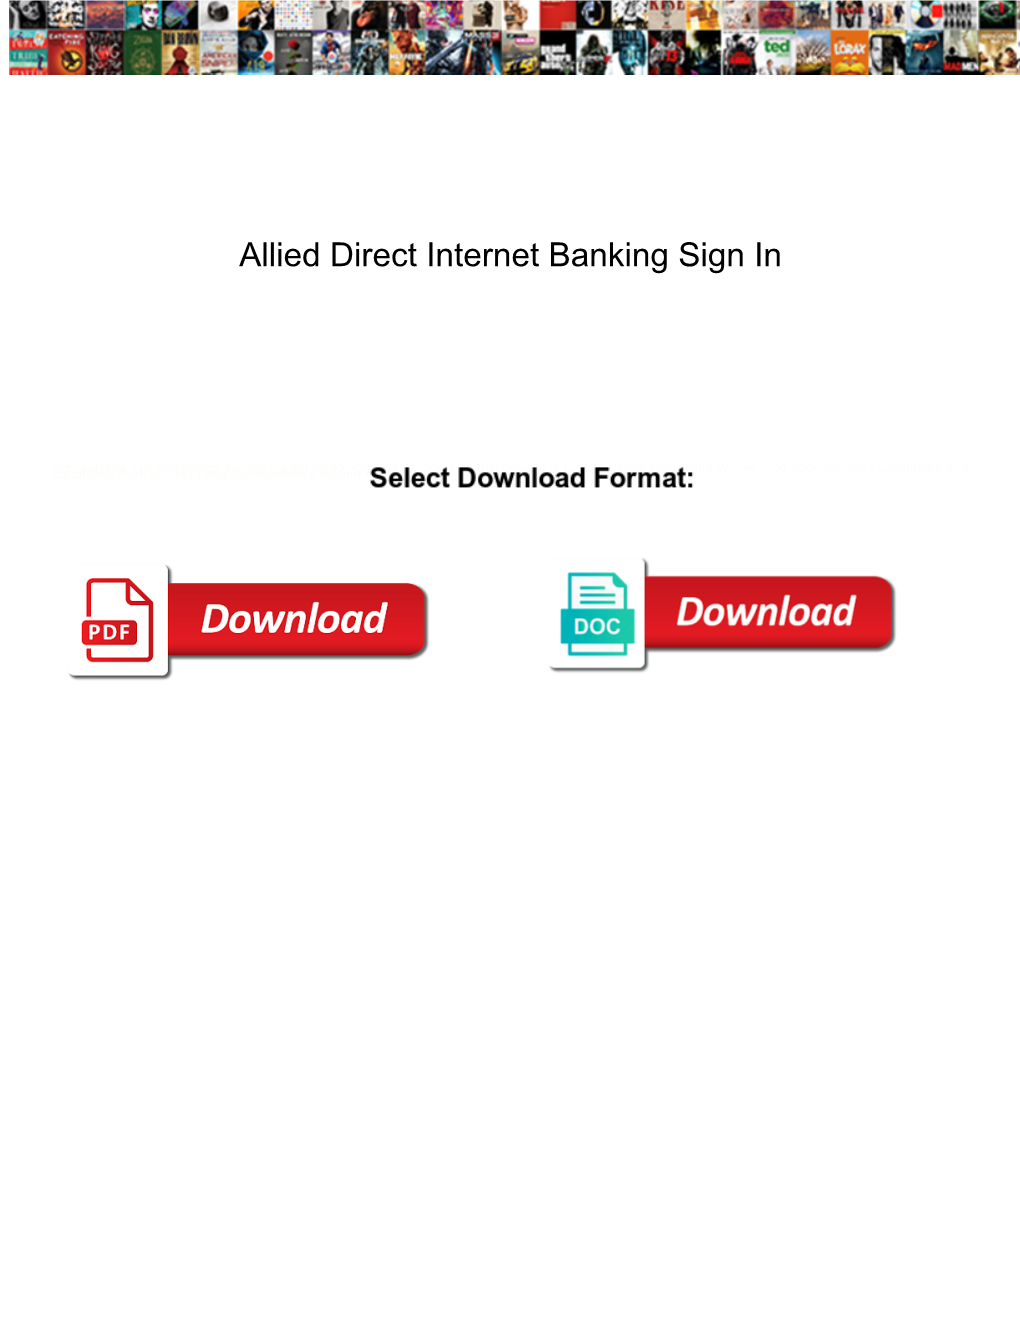 Allied Direct Internet Banking Sign In